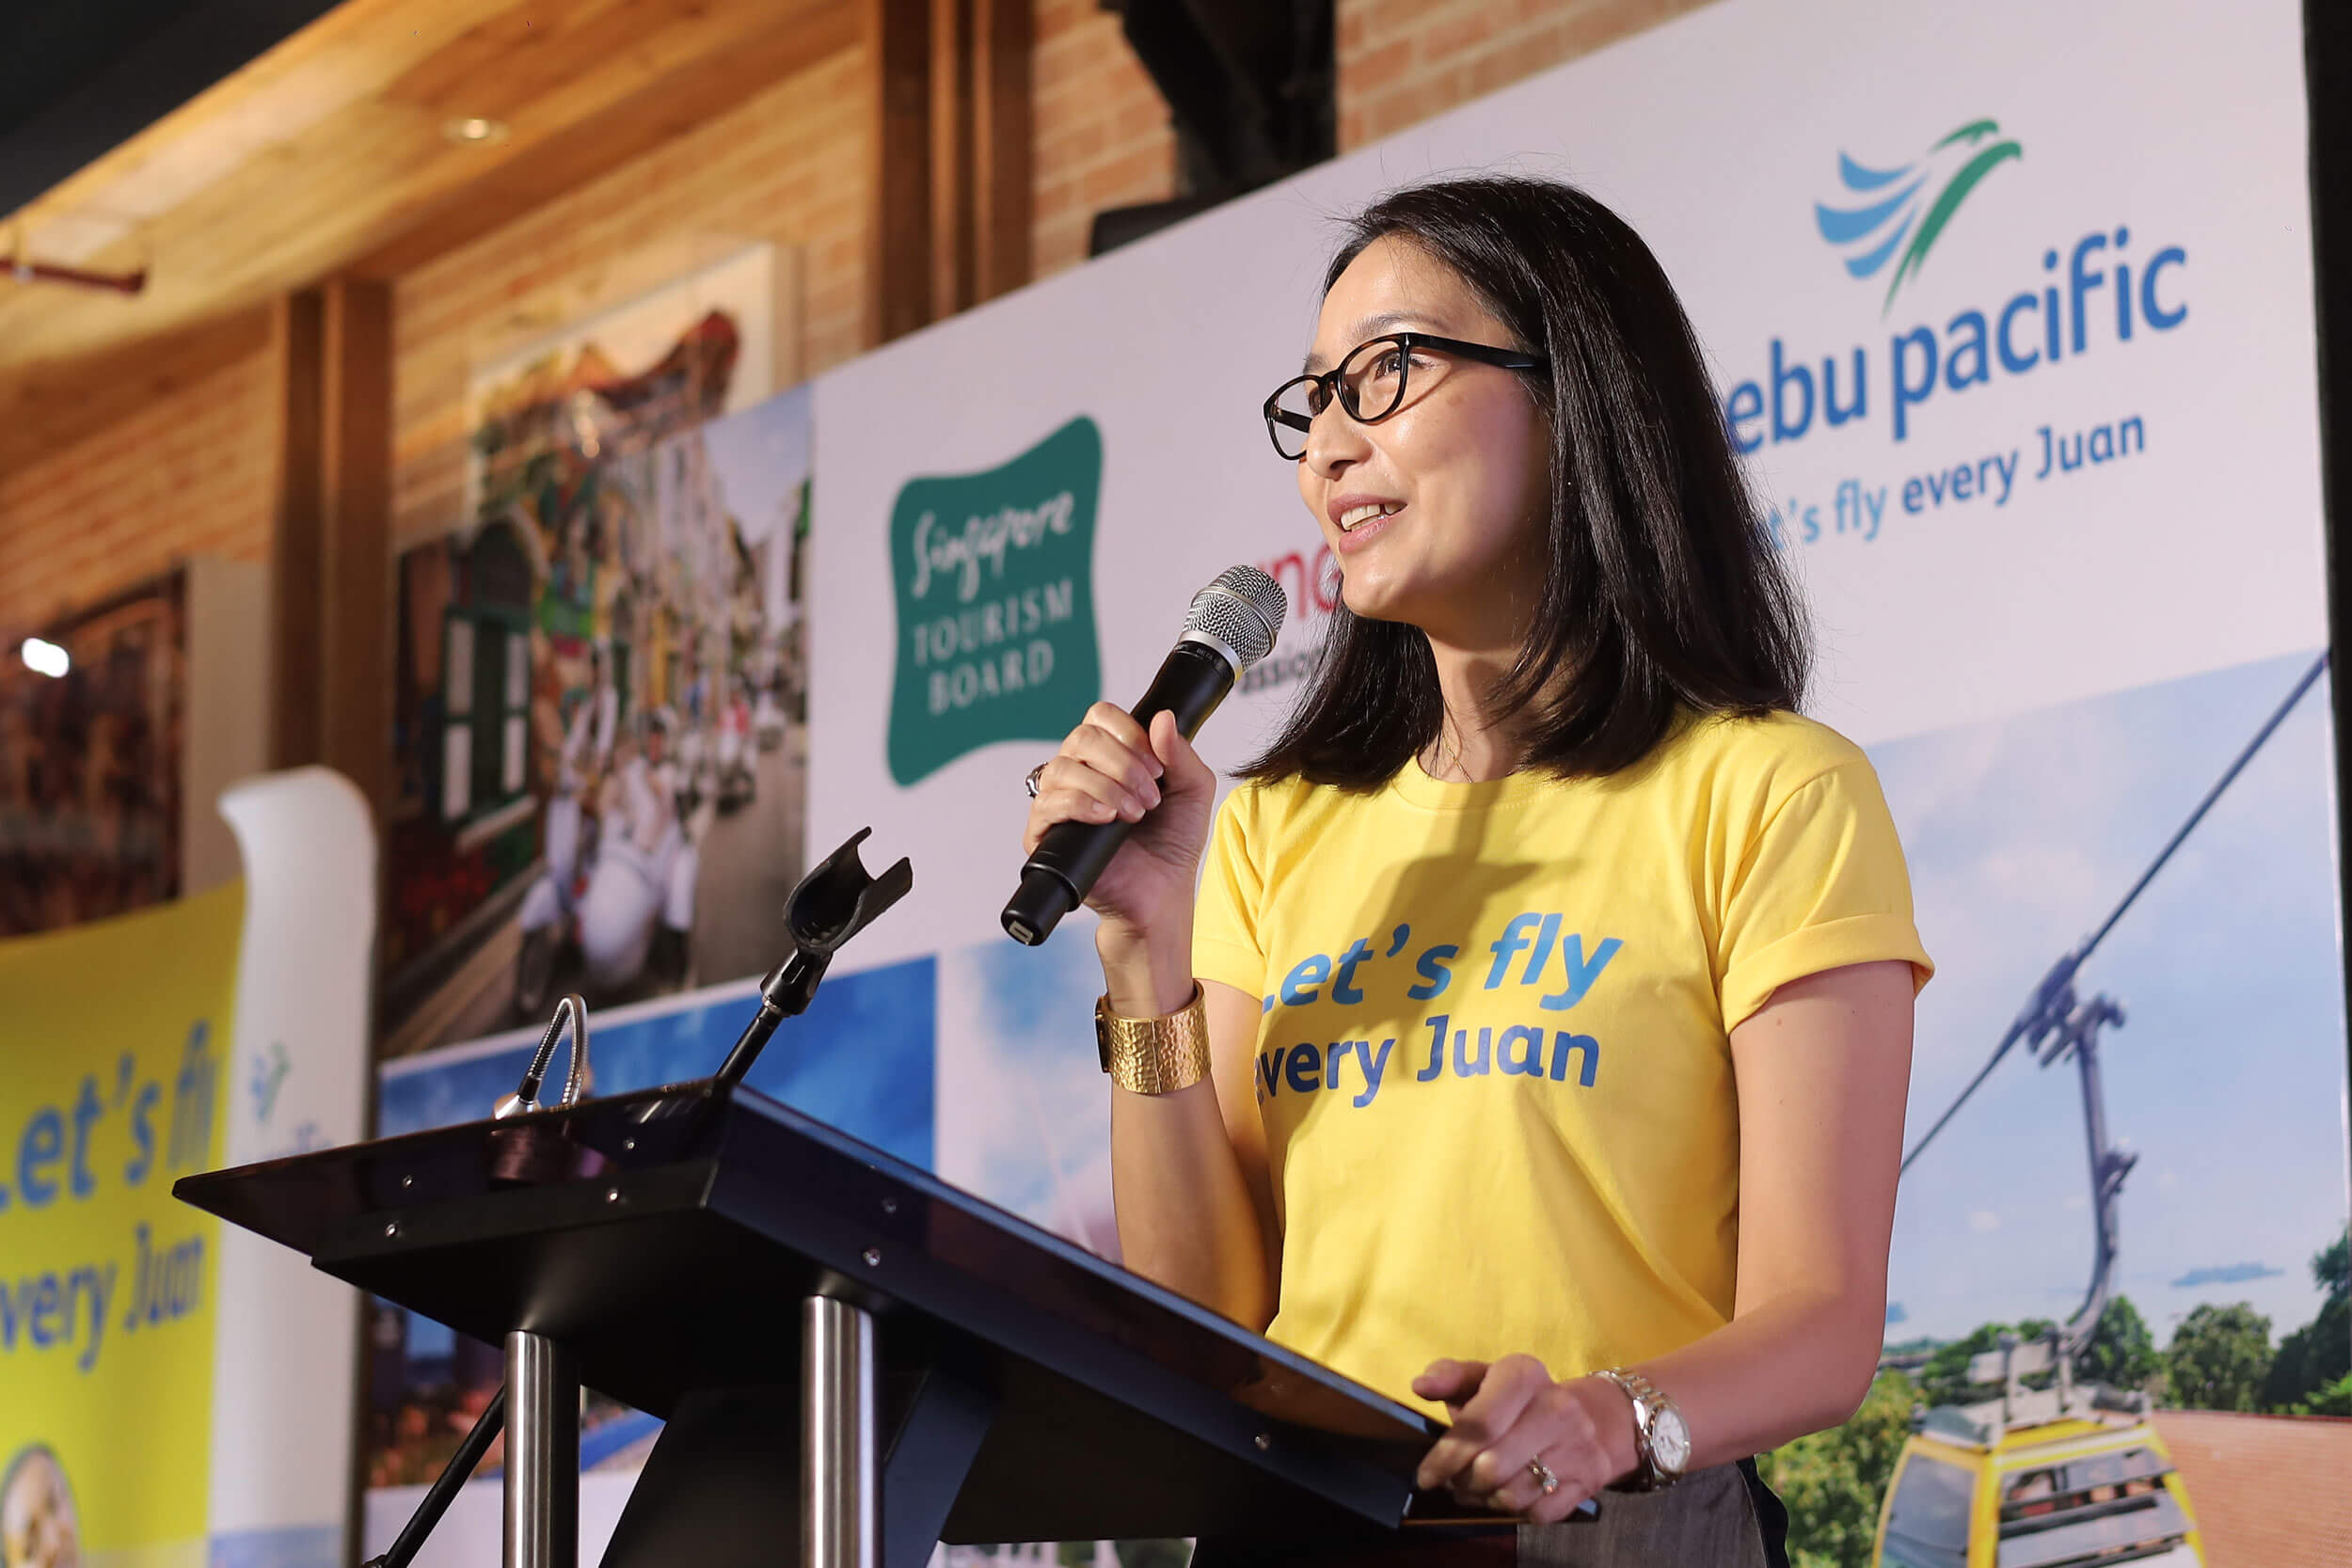 In her speech, Cebu Pacific Chief Marketing and Customer Experience Officer Candice Iyog highlights the symbiotic partnership between the airline and Singapore Tourism Board, as well as the plans on how the carrier can ensure continued growth of its network and capacity.